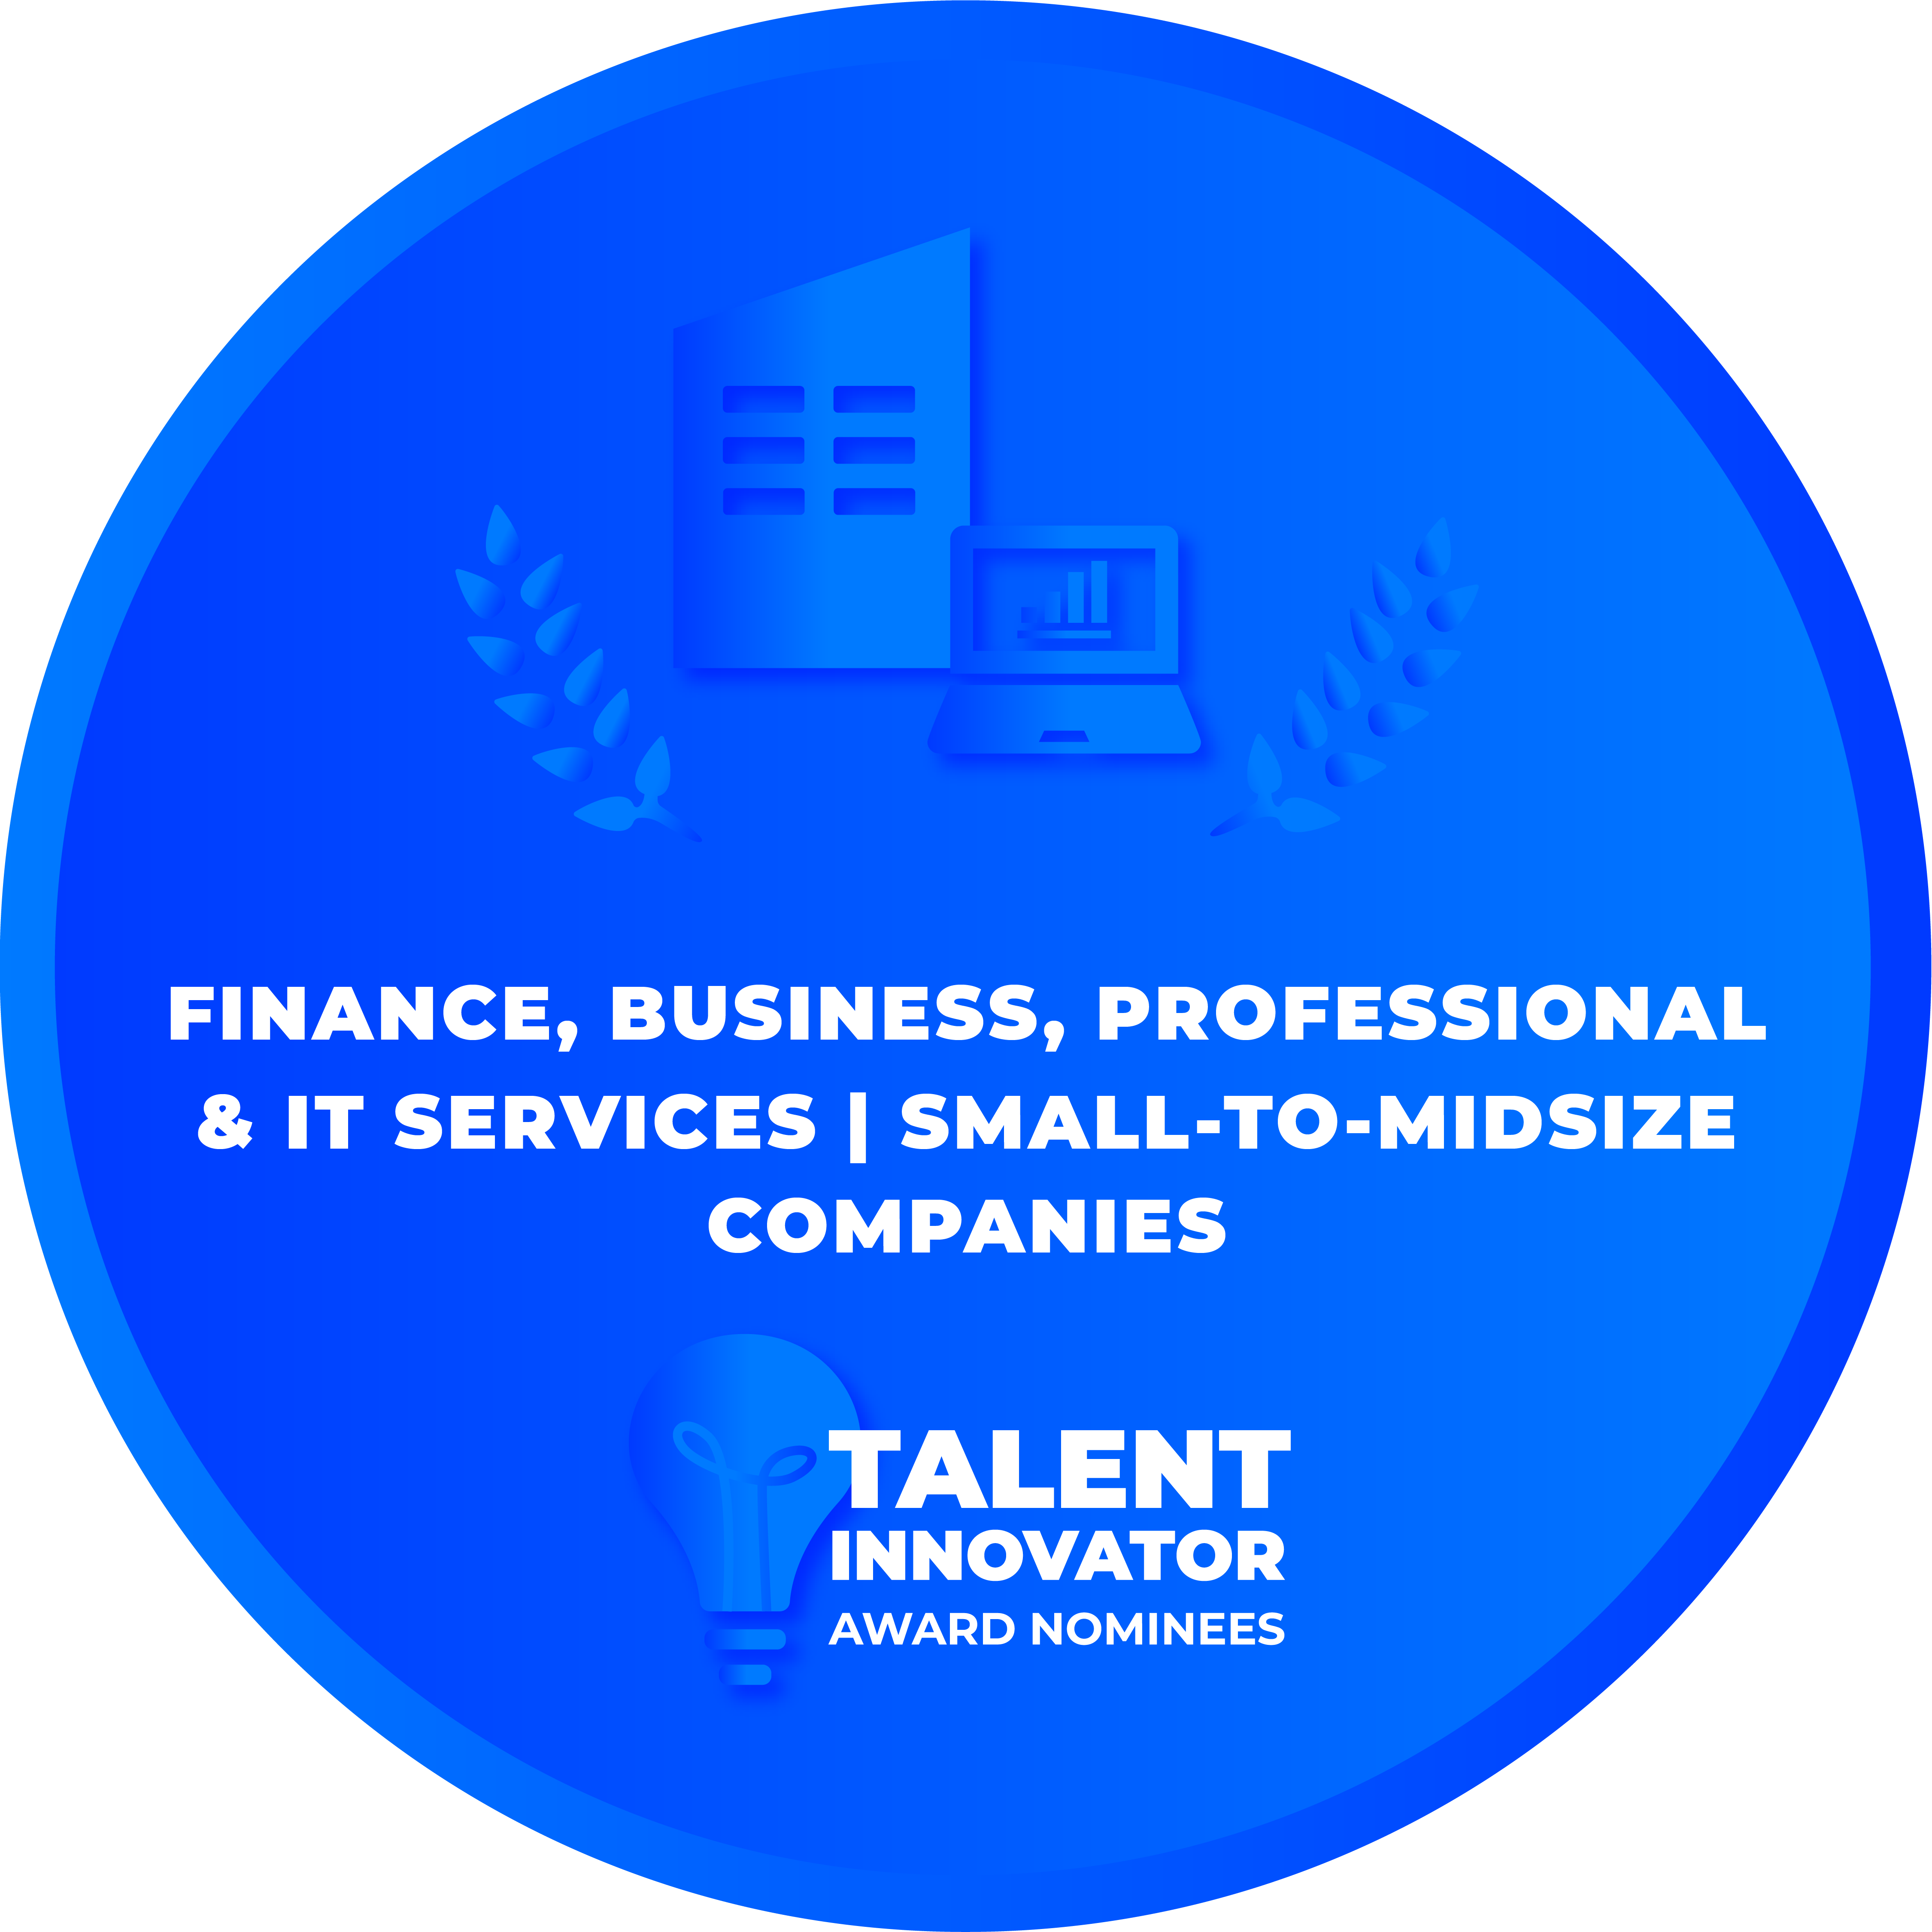 CRCA 2022 - TALENT INNOVATOR AWARD - Finance Business Professional IT Services Small-To-Midsize Companies